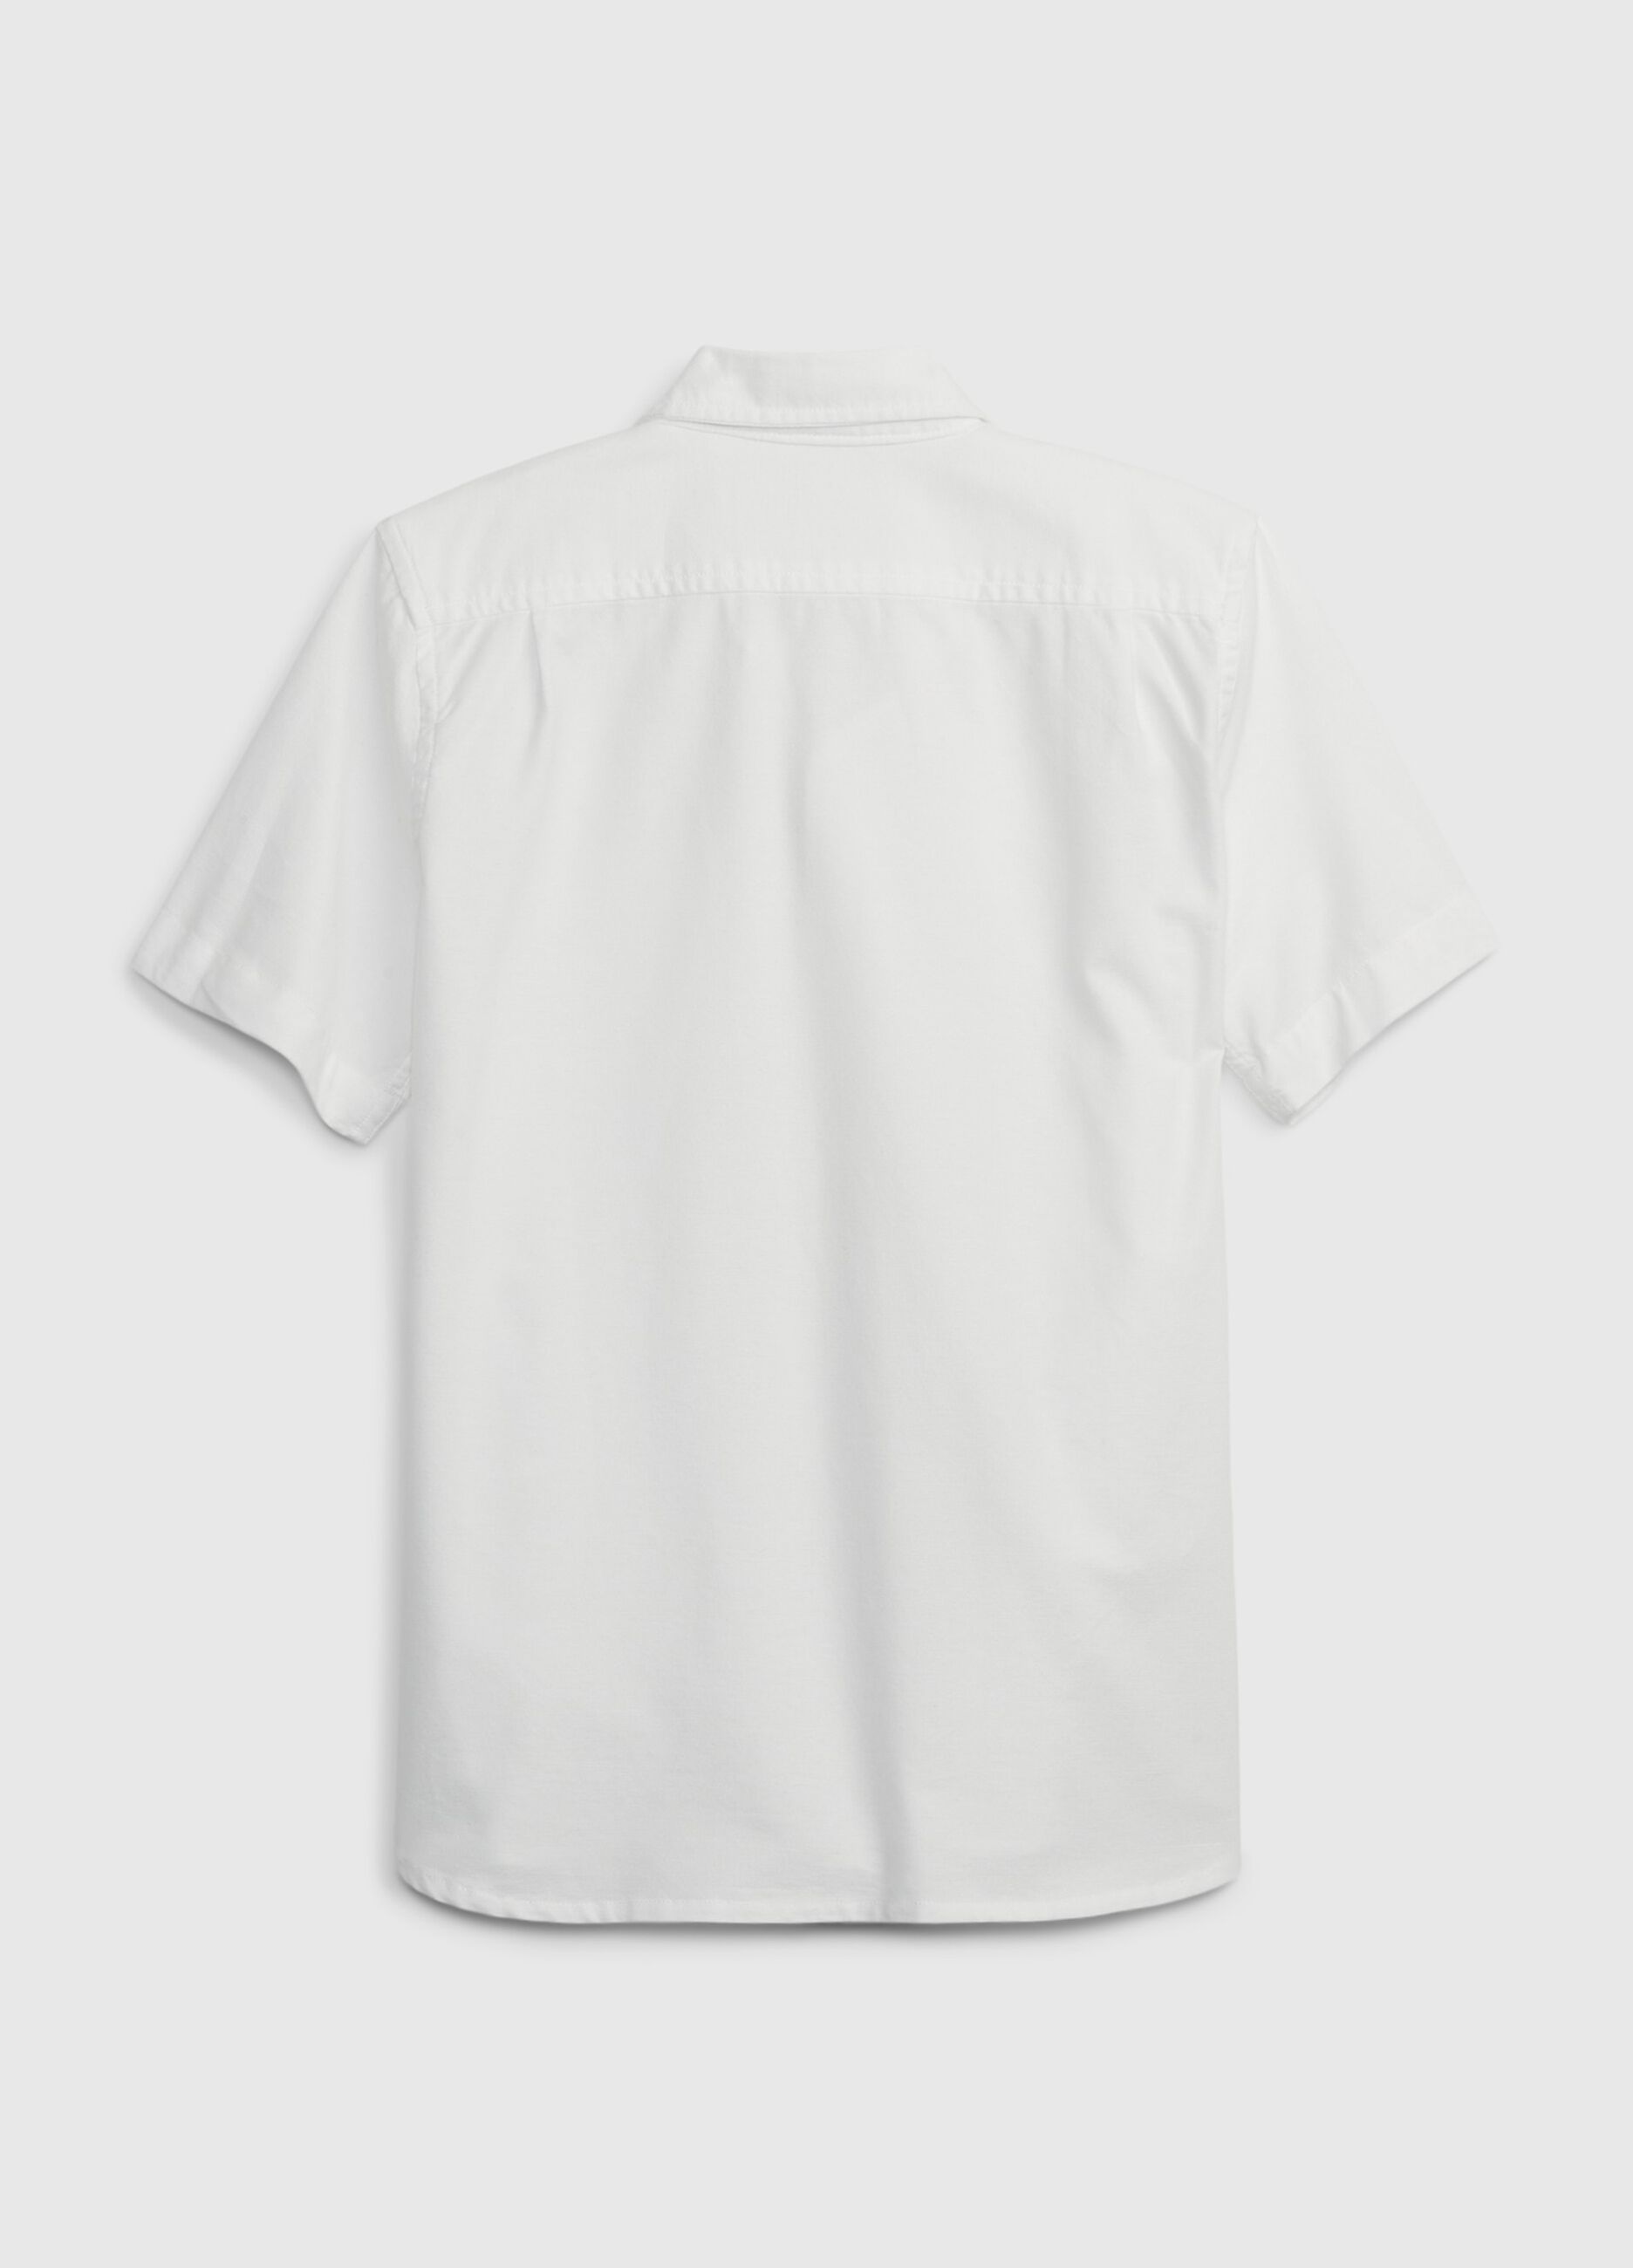 Short-sleeved shirt in Oxford cotton